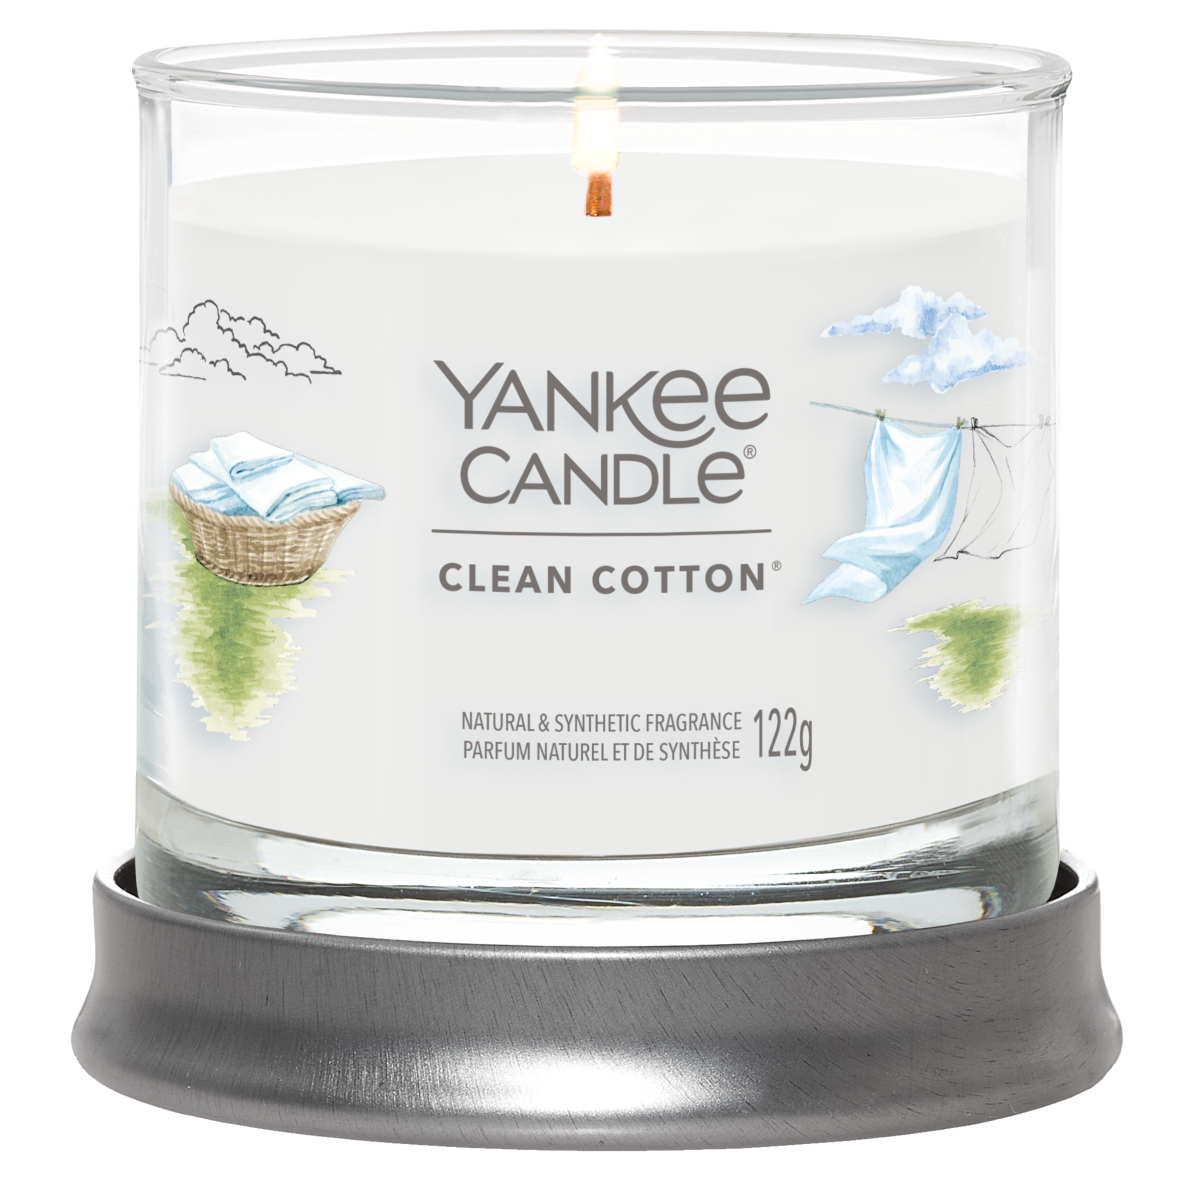 https://www.candlestore.fr/Files/102941/Img/18/yankee-candle-petite-jarre-clean-coton-new-1-zoom.png